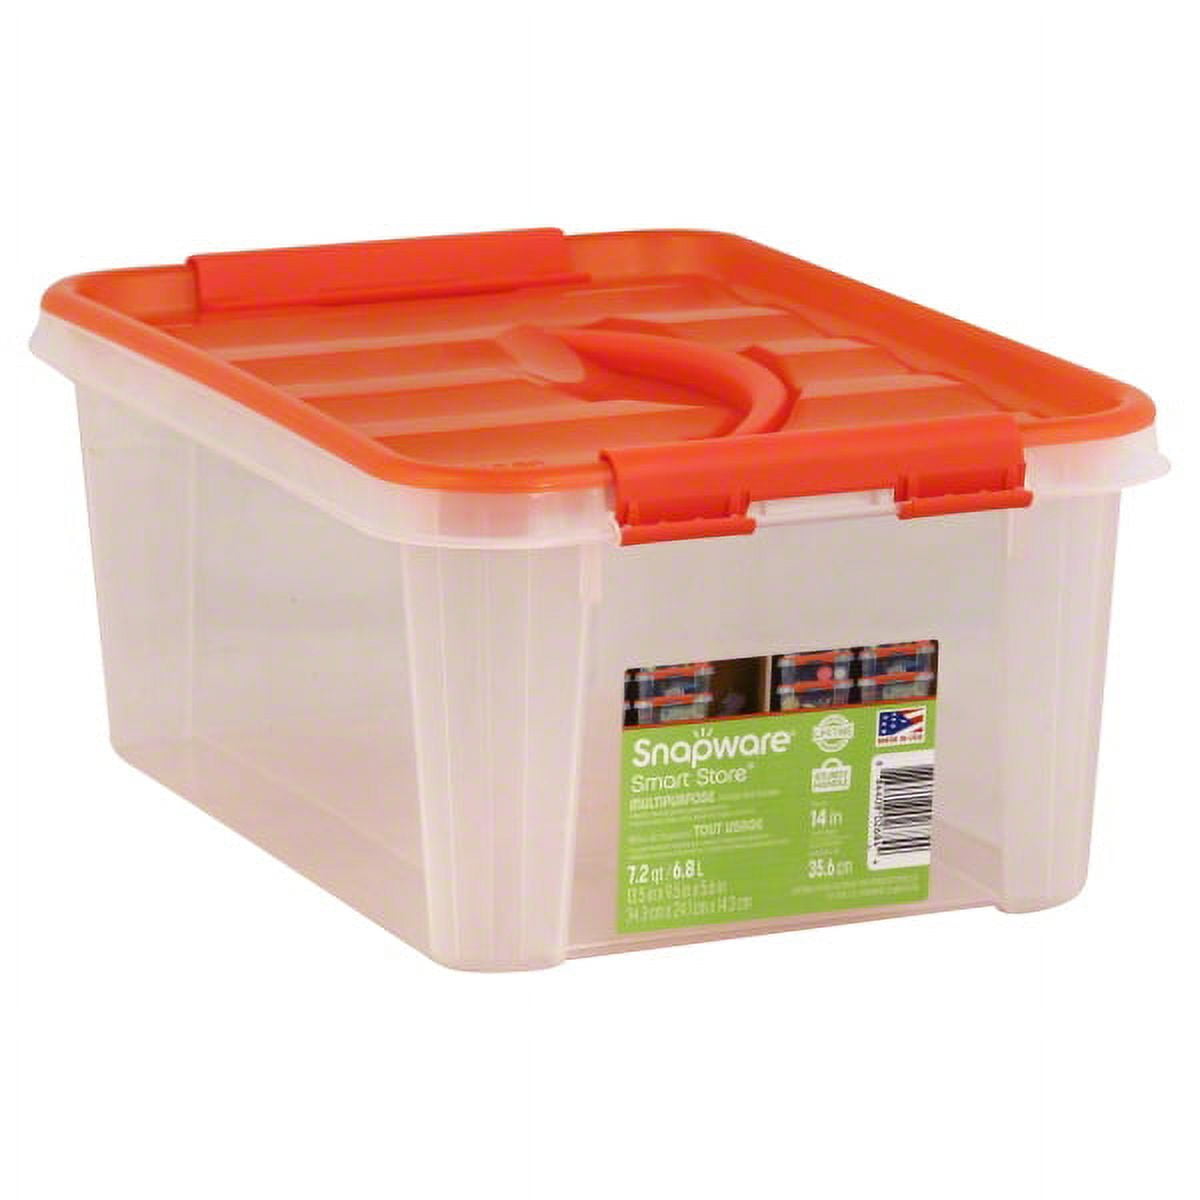 Snapware Smart Store 14x6 with Coral Handles, Set of 6 